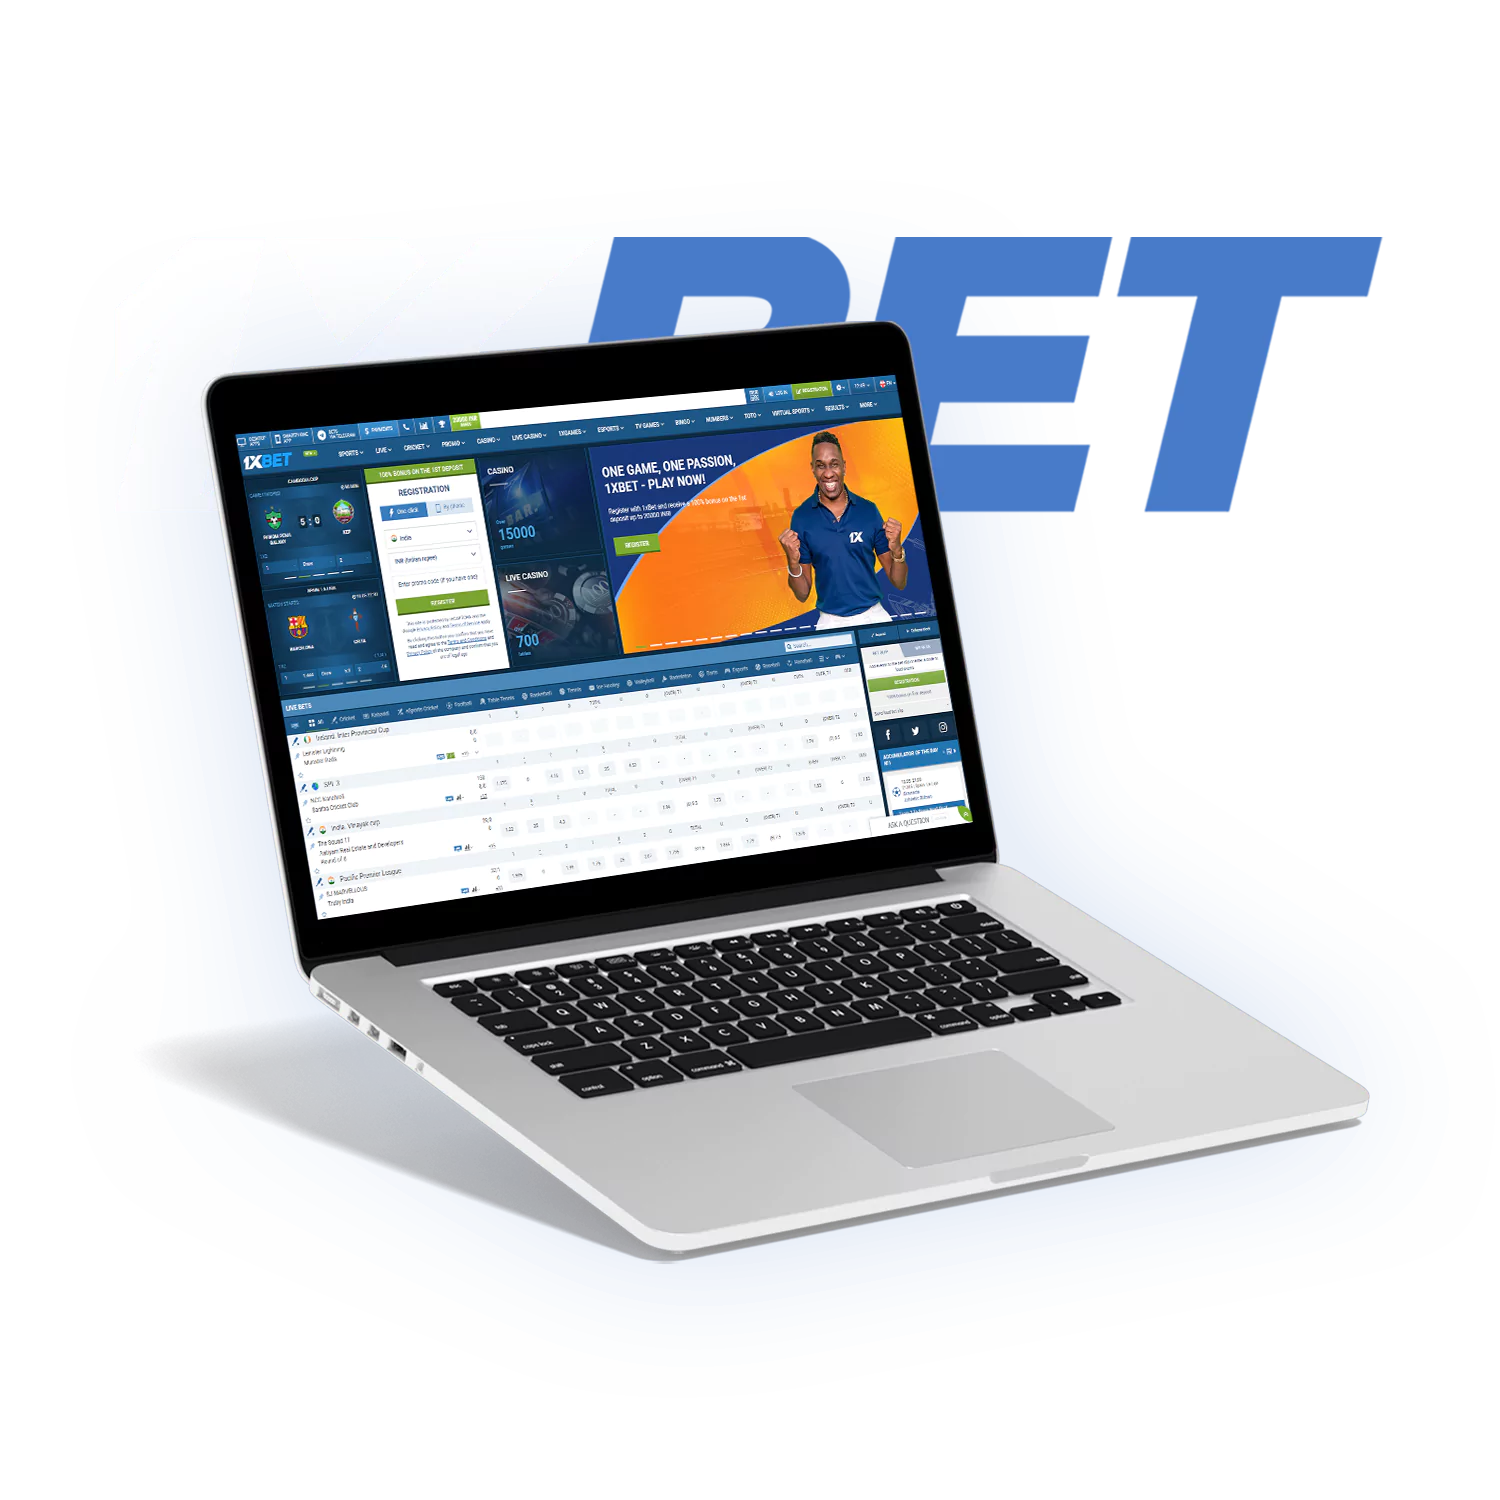 1xBet is available for Windows and macOS